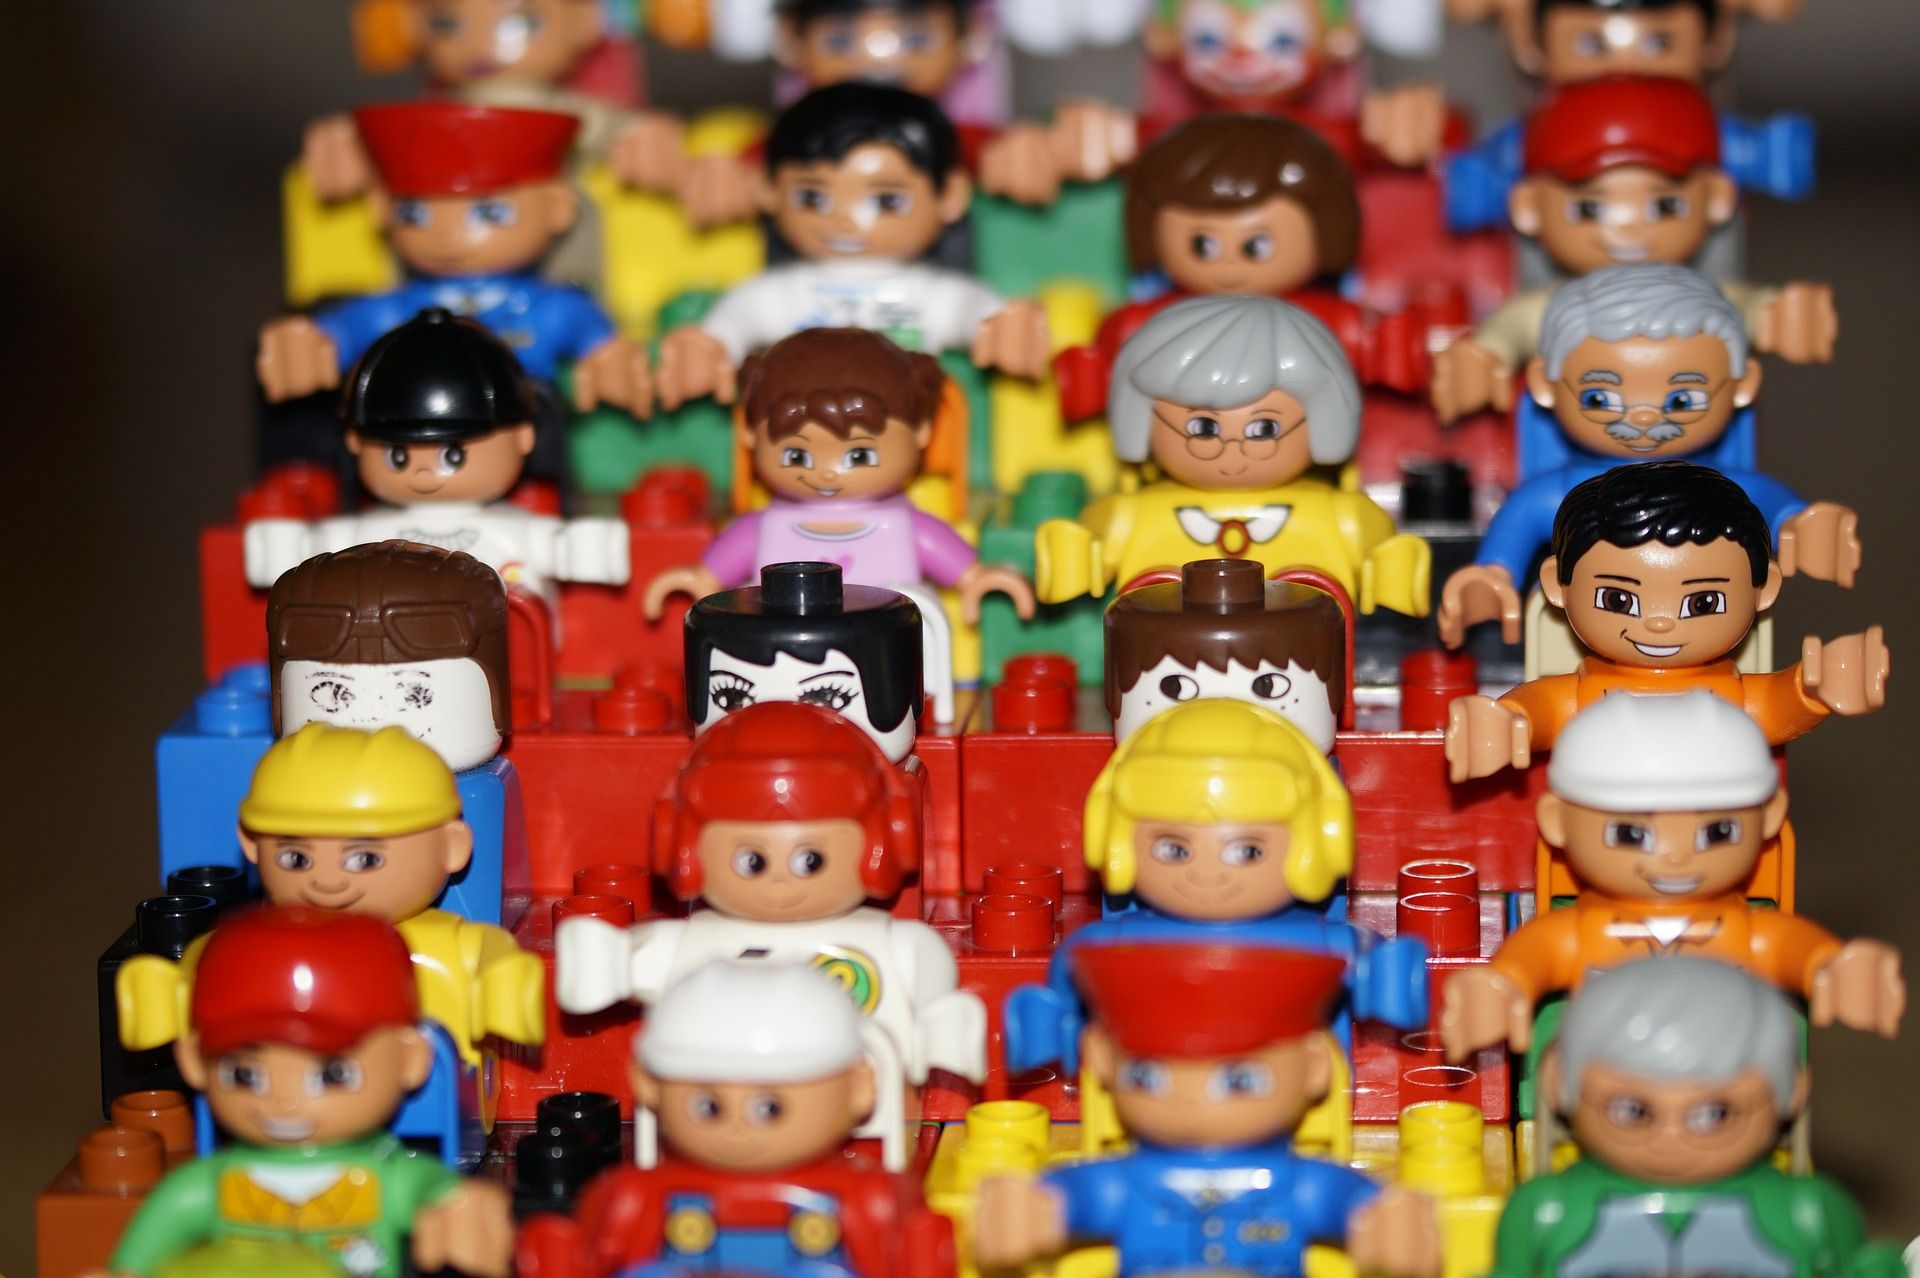 ‘Everyone is Awesome’: Lego’s rainbow-coloured figurines to celebrate diversity